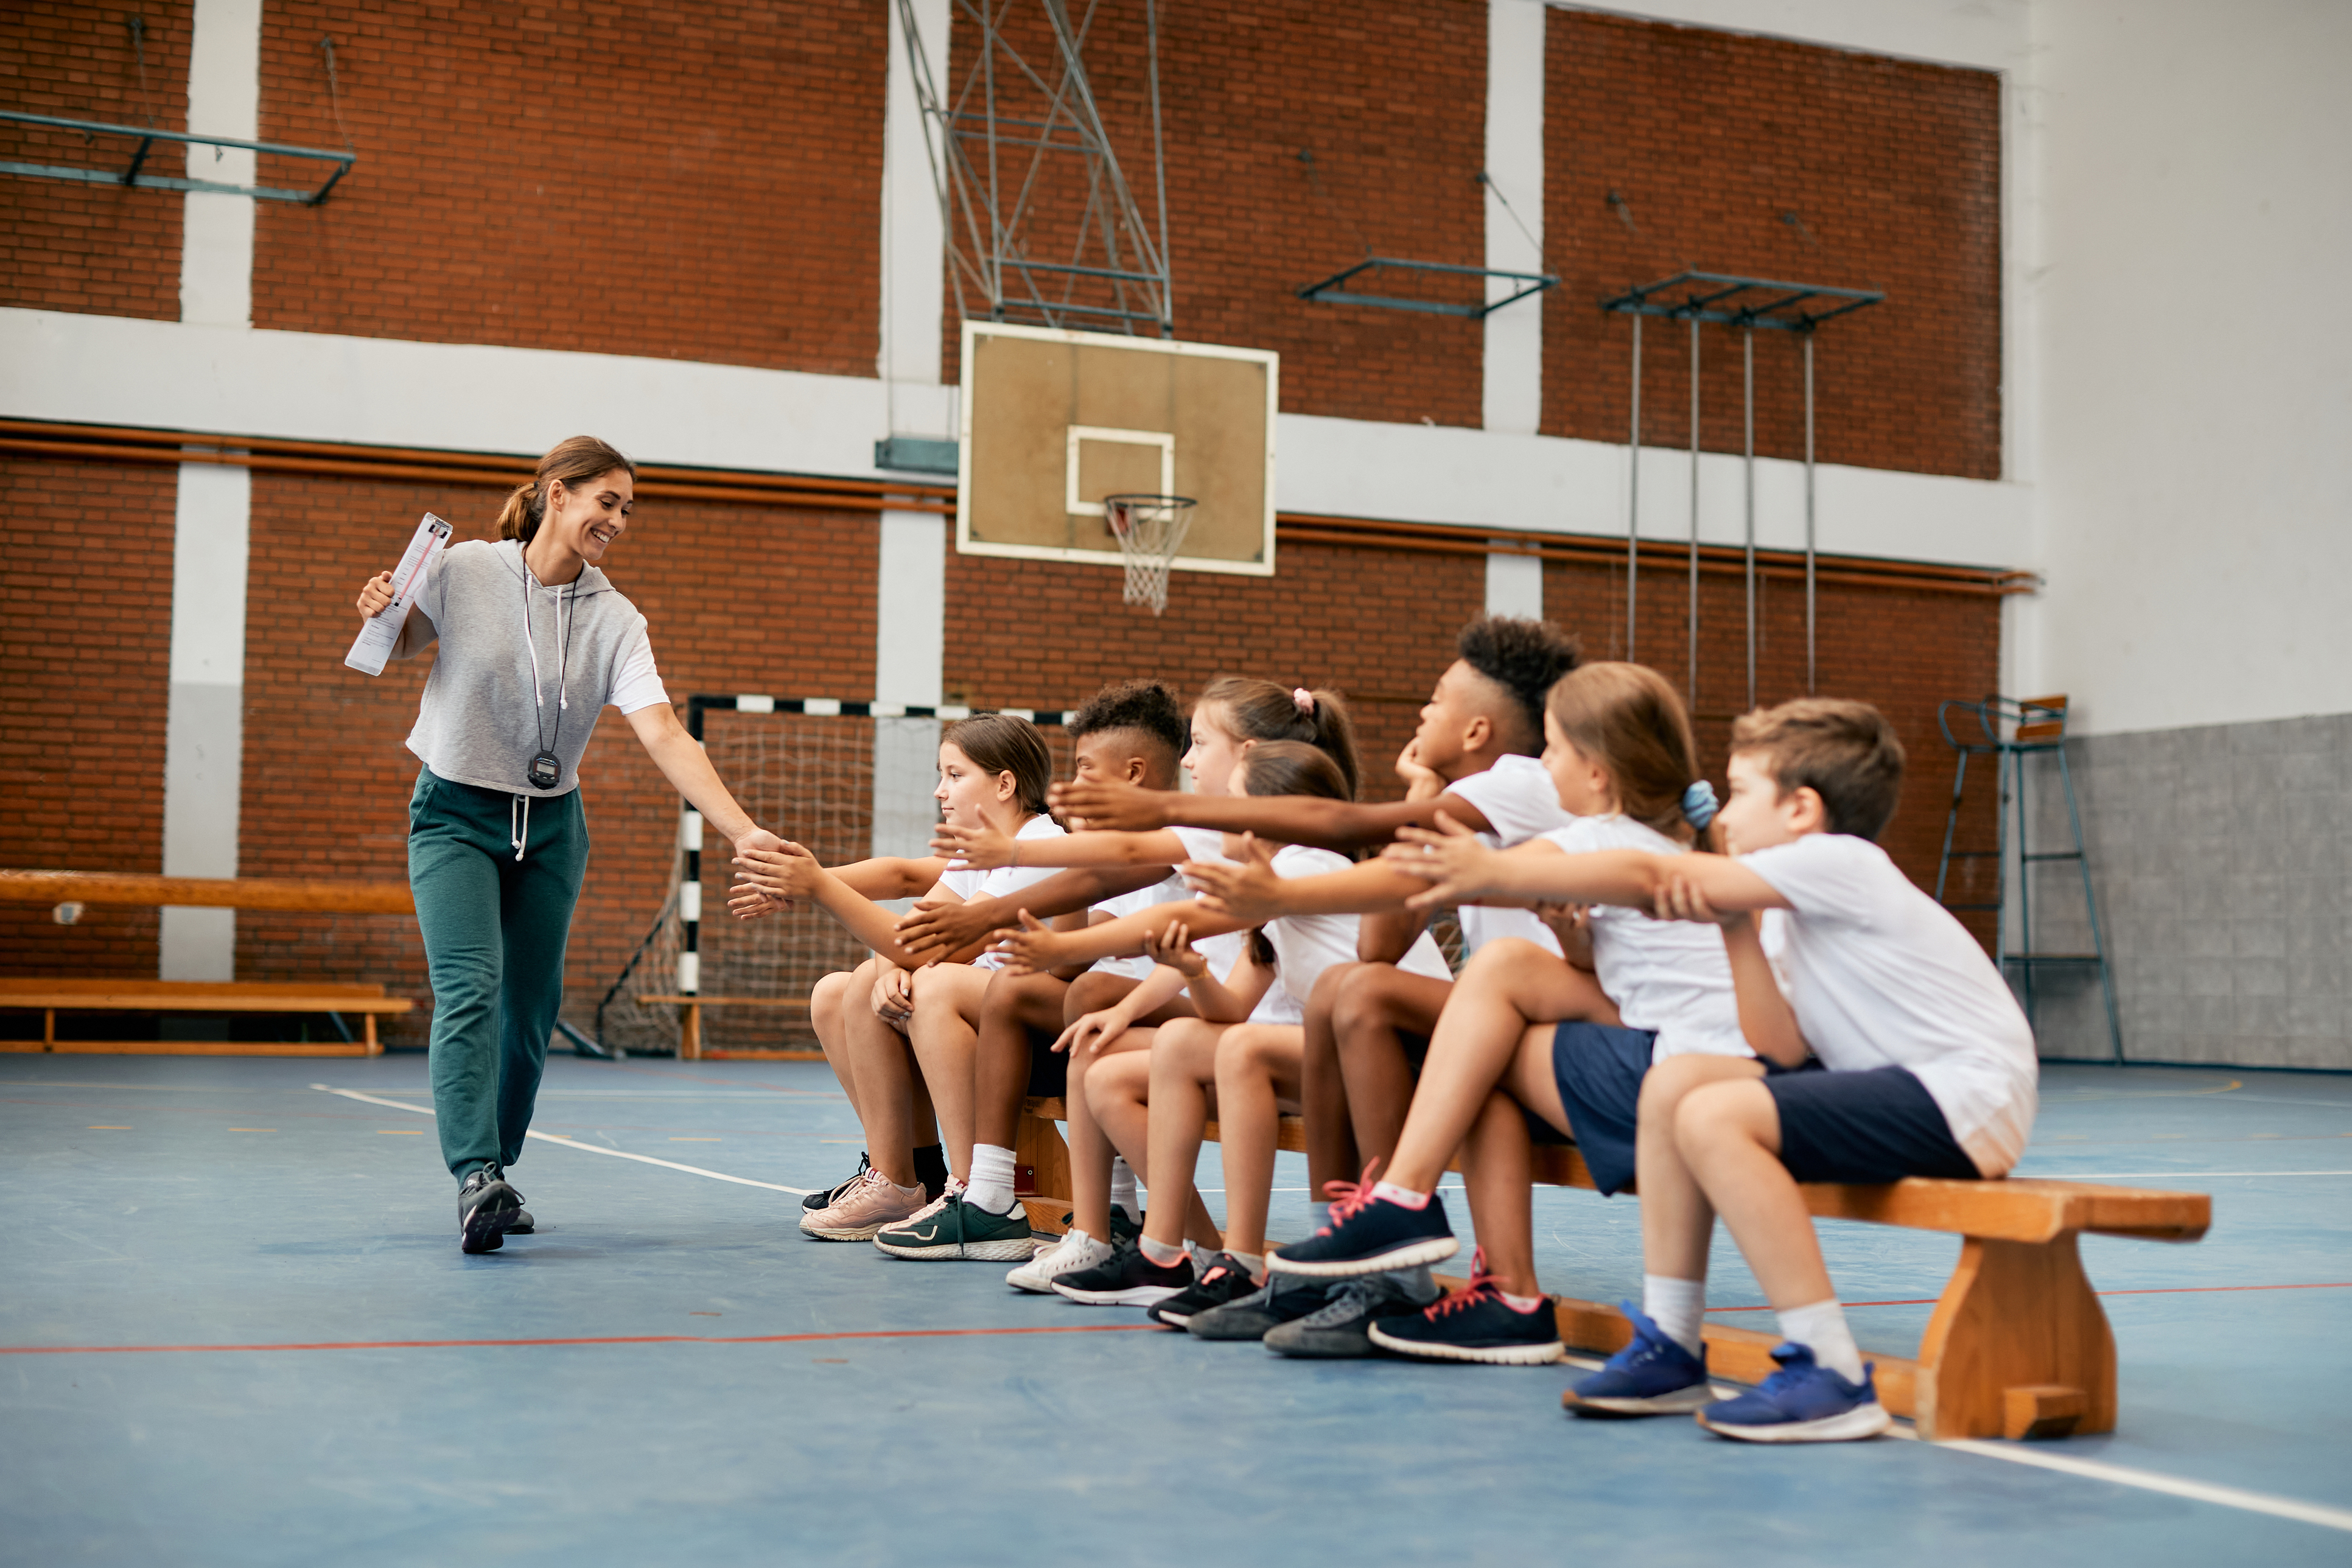 A feminine-presenting gym teacher high fives a line of students extending their hands while sitting on a bench in a gymnasium. The teacher has long brown hair that is tied back in a ponytail, and is wearing athletic clothing and holding a clipboard. The students are diverse in terms of gender expression and skin tone. Everyone is smiling enthusiastically.